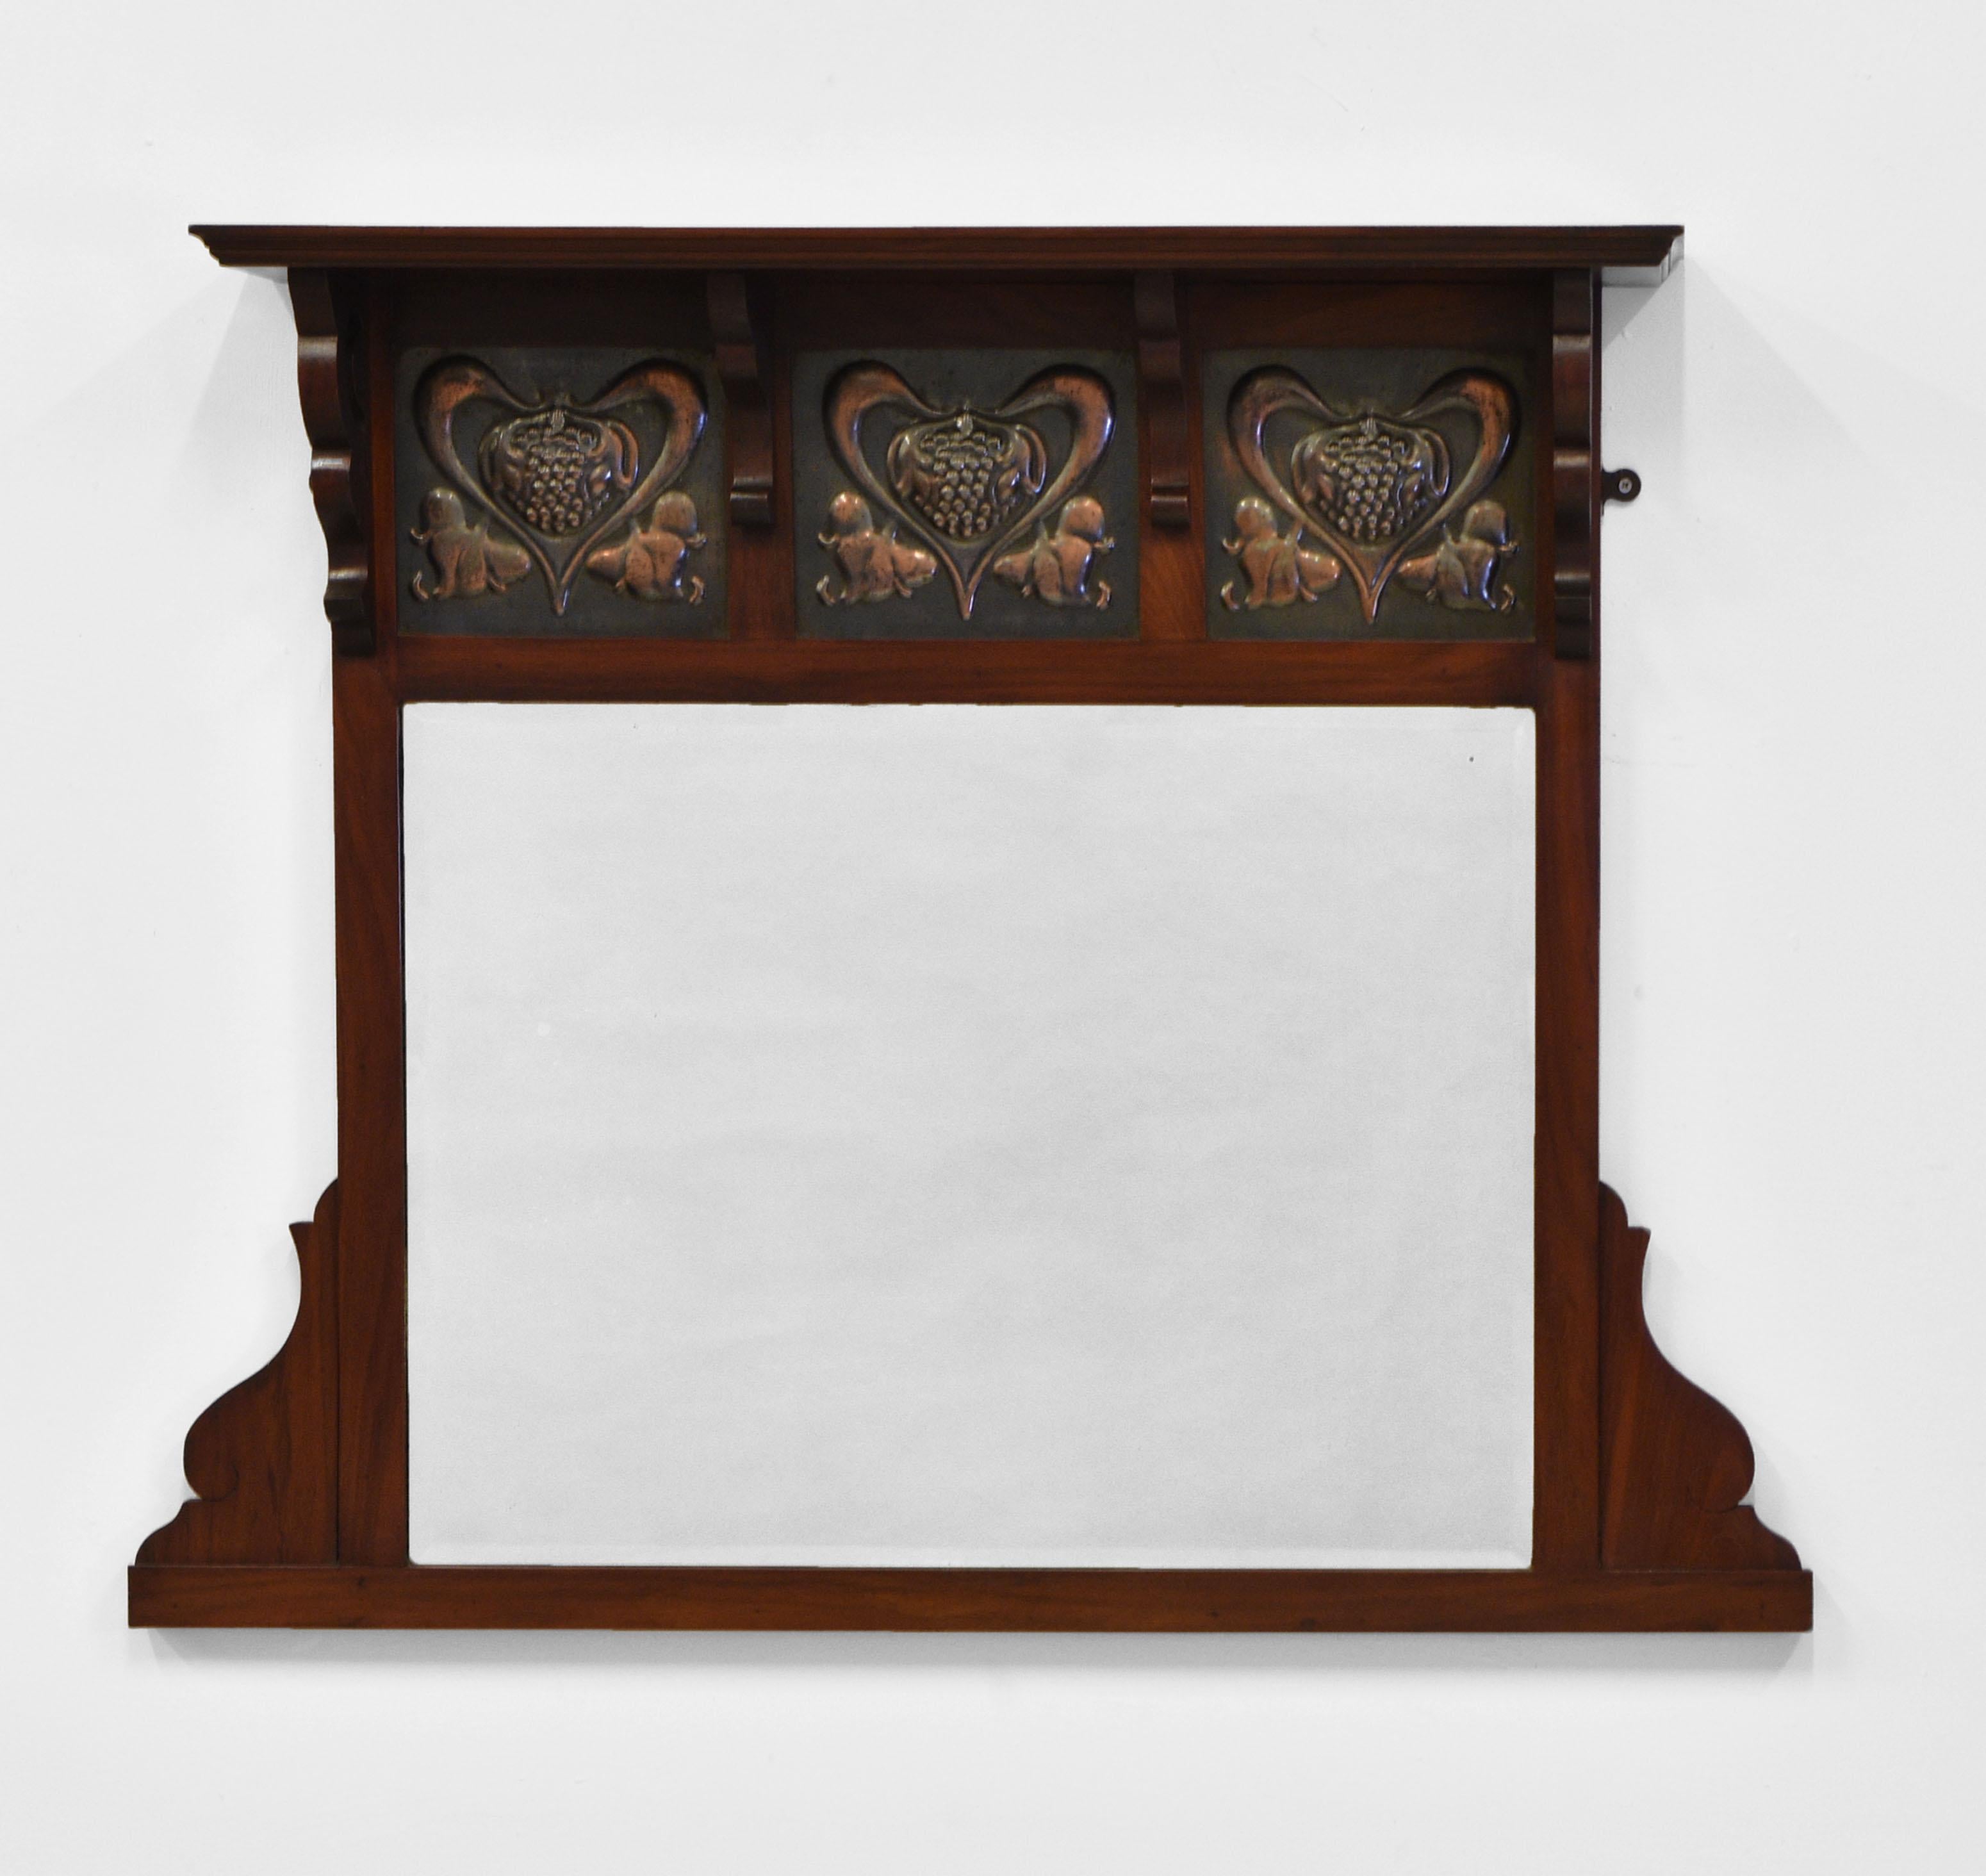 An Art Nouveau walnut over mantle wall mirror, with sinuous metal heart shaped floral design insets, and pierced end brackets. British - Circa 1900.

It is in very good condition for its age, with the original bevelled glass. There is no damage to